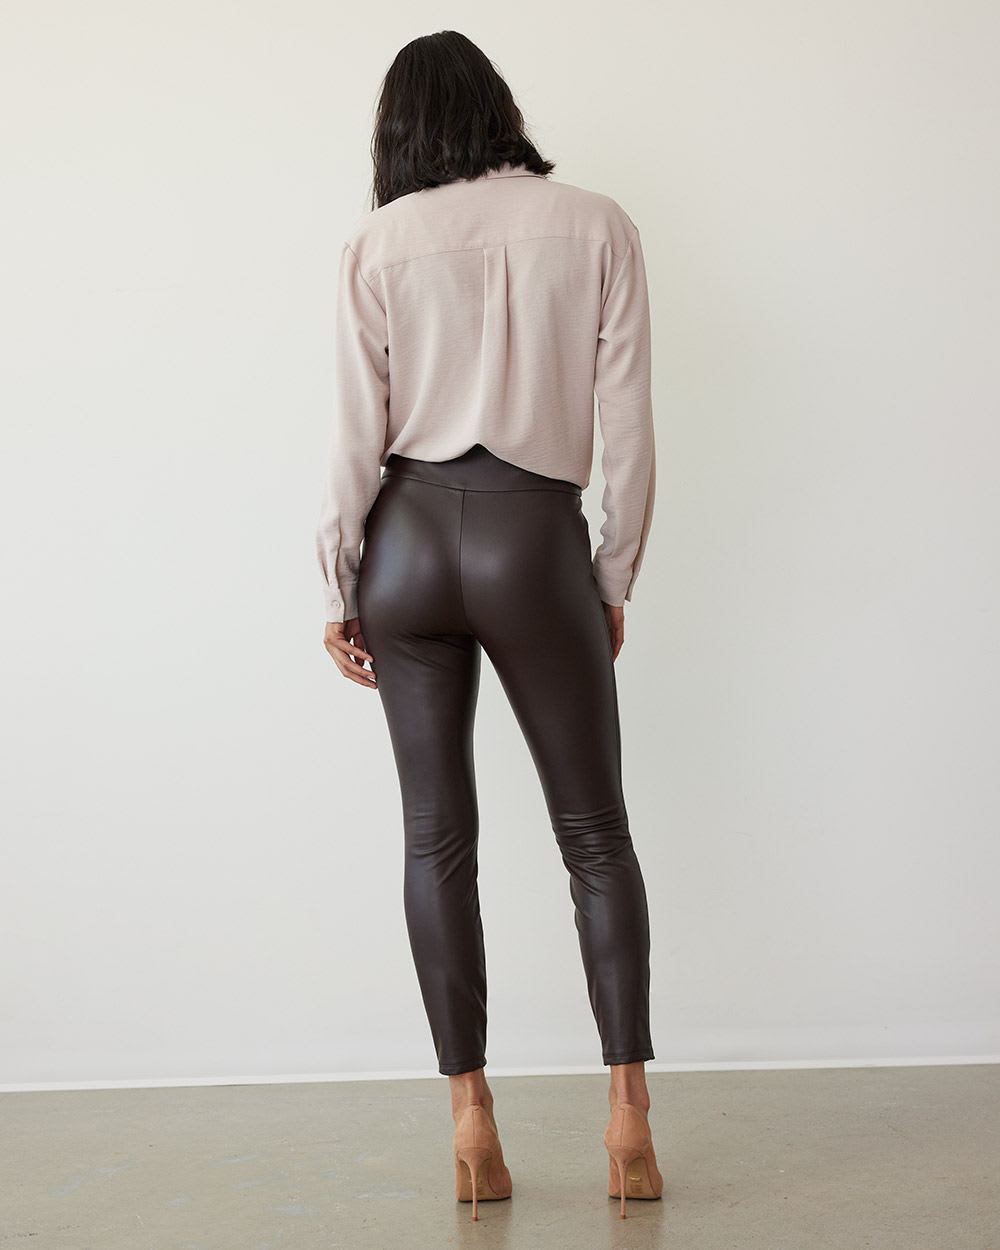 Faux Leather Leggings Pants for Women High Waisted Pleather Pants